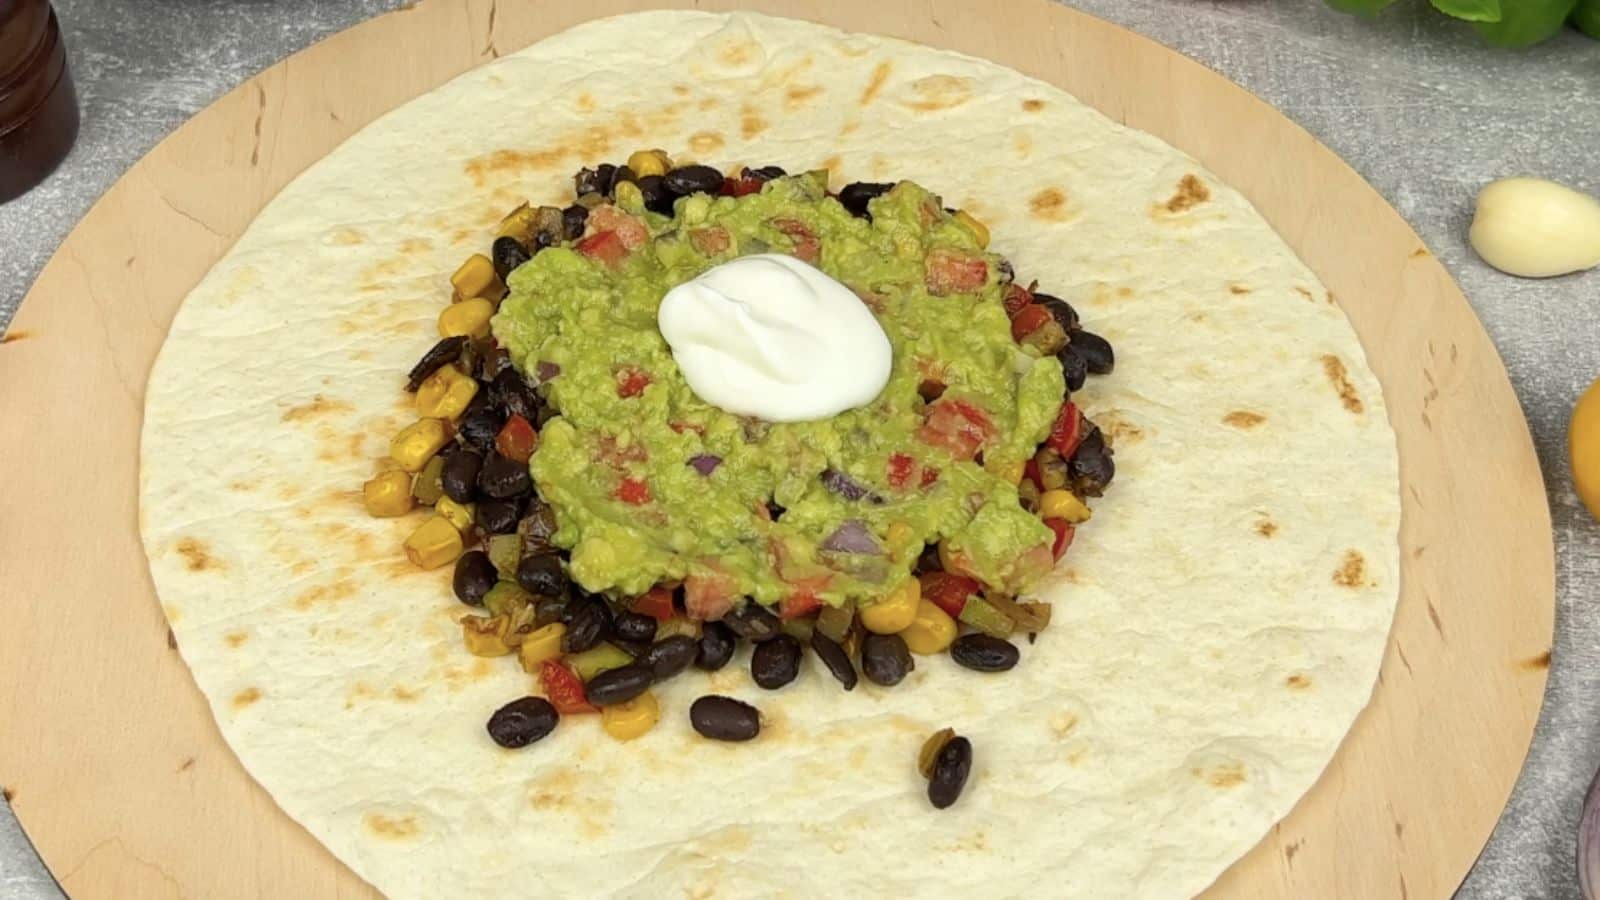 Filling burrito with beans, guacamole, and sour cream.
